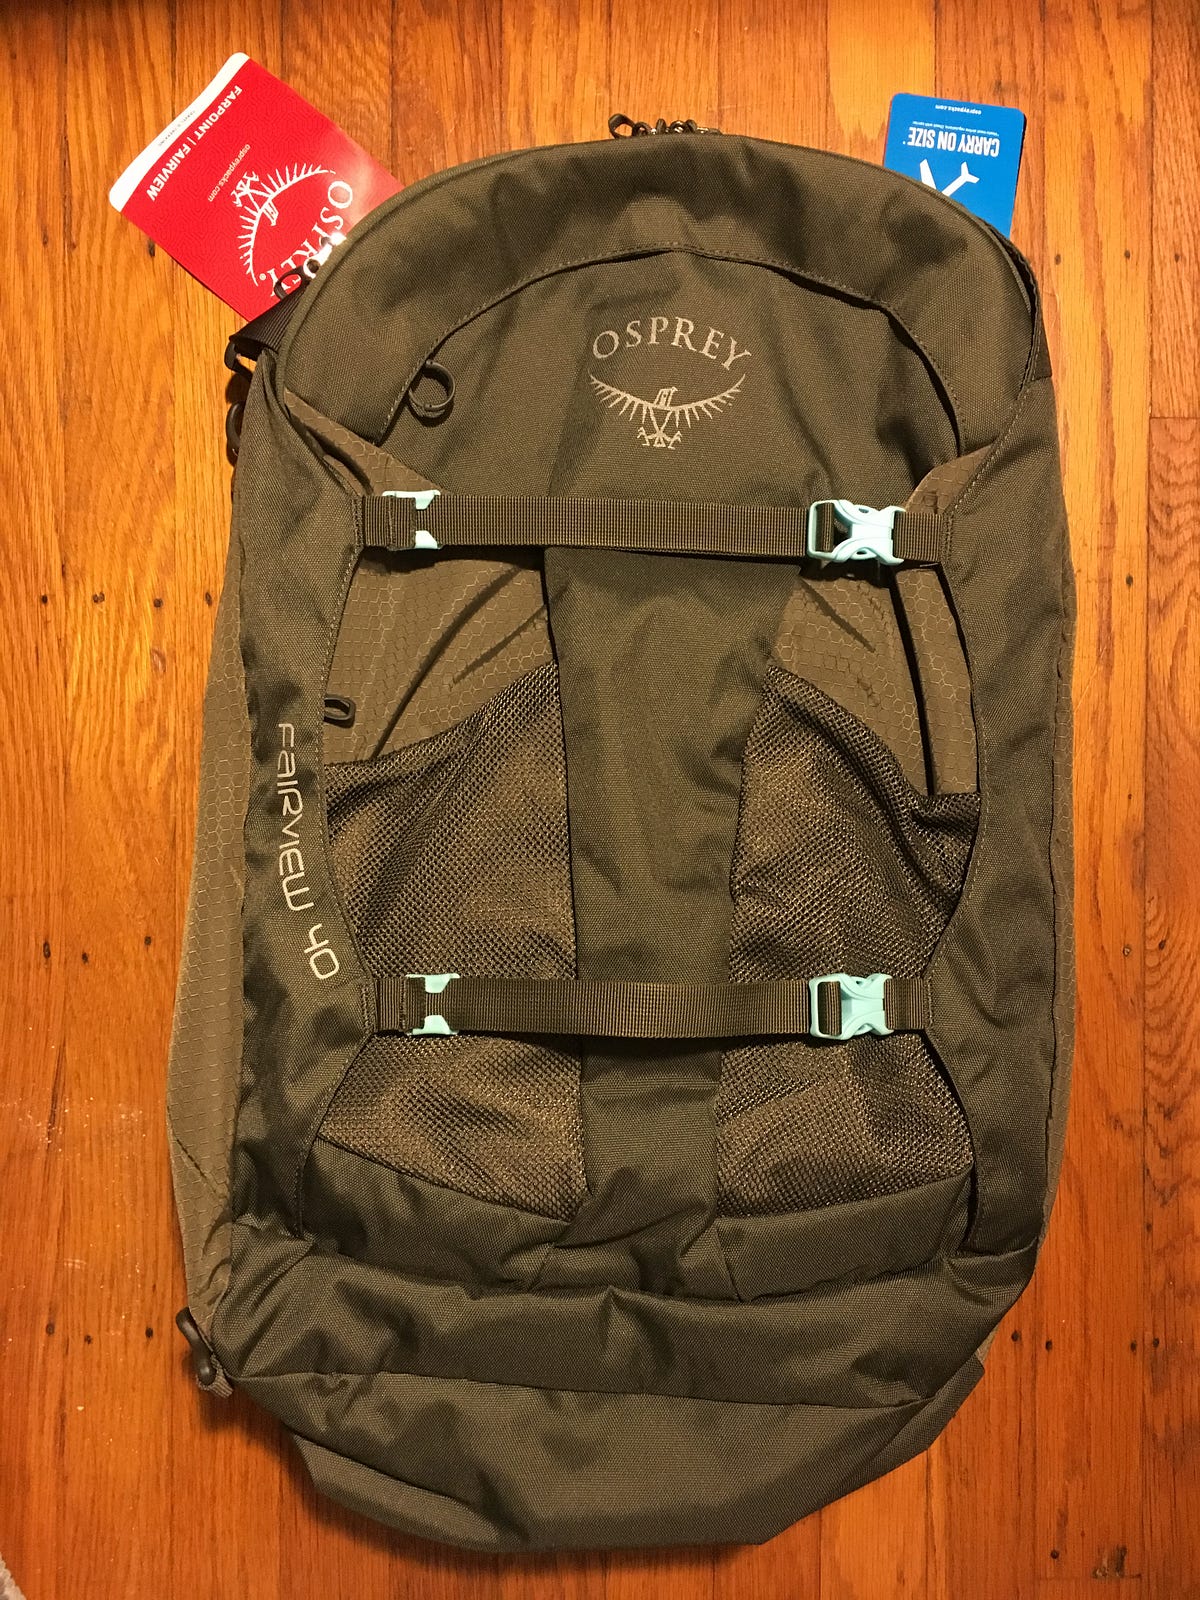 Osprey Fairview 40 Review. I need a bag that allows me flexibility… | by  Steely | Medium